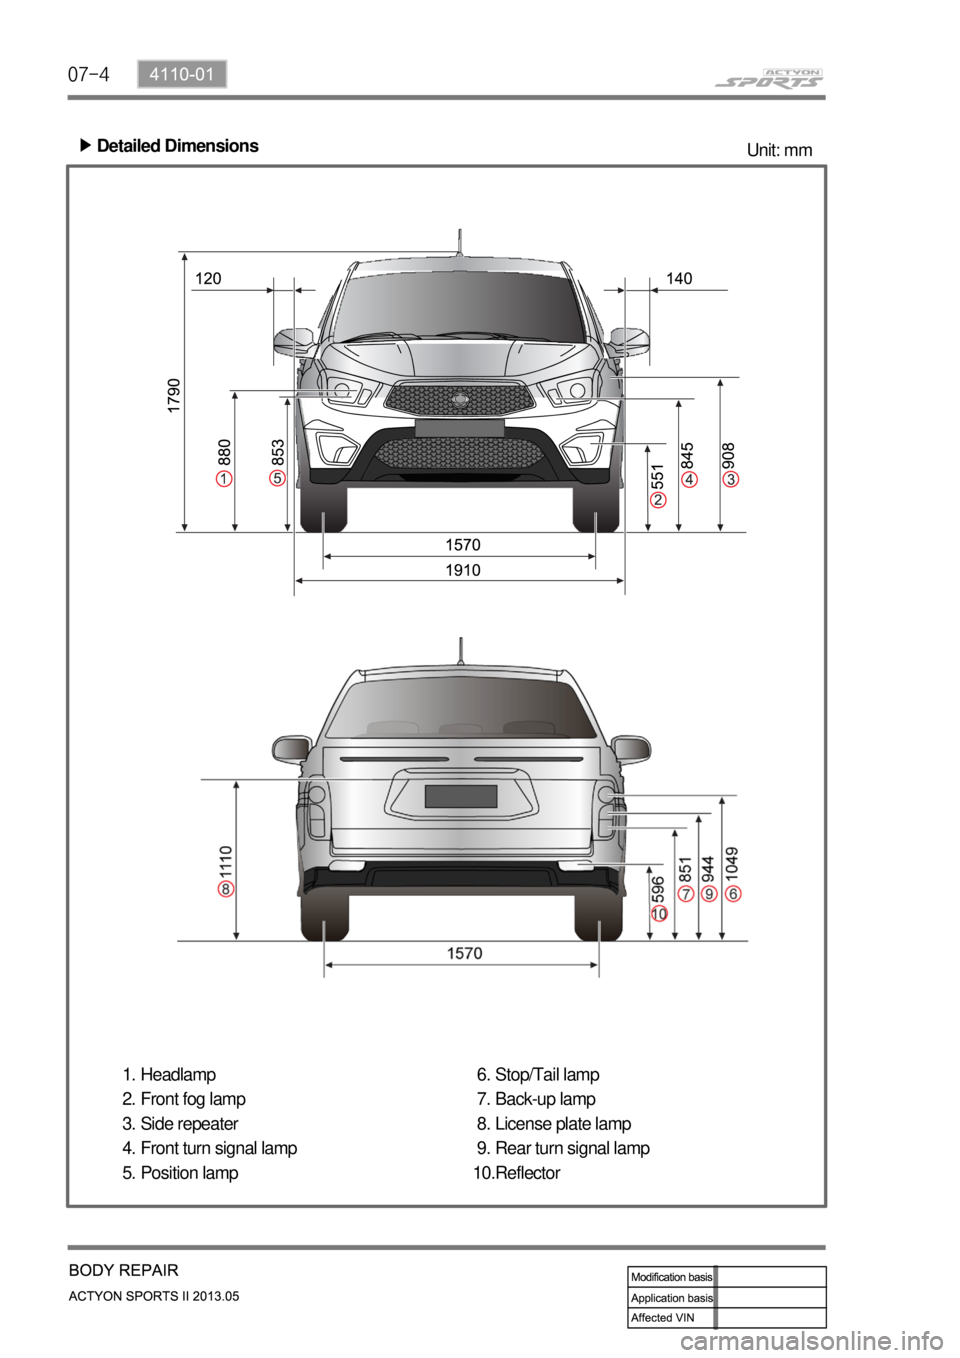 SSANGYONG NEW ACTYON SPORTS 2013  Service Manual 07-4
Detailed Dimensions ▶
Unit: mm
Headlamp
Front fog lamp
Side repeater
Front turn signal lamp
Position lamp 1.
2.
3.
4.
5.Stop/Tail lamp
Back-up lamp
License plate lamp
Rear turn signal lamp
Refl